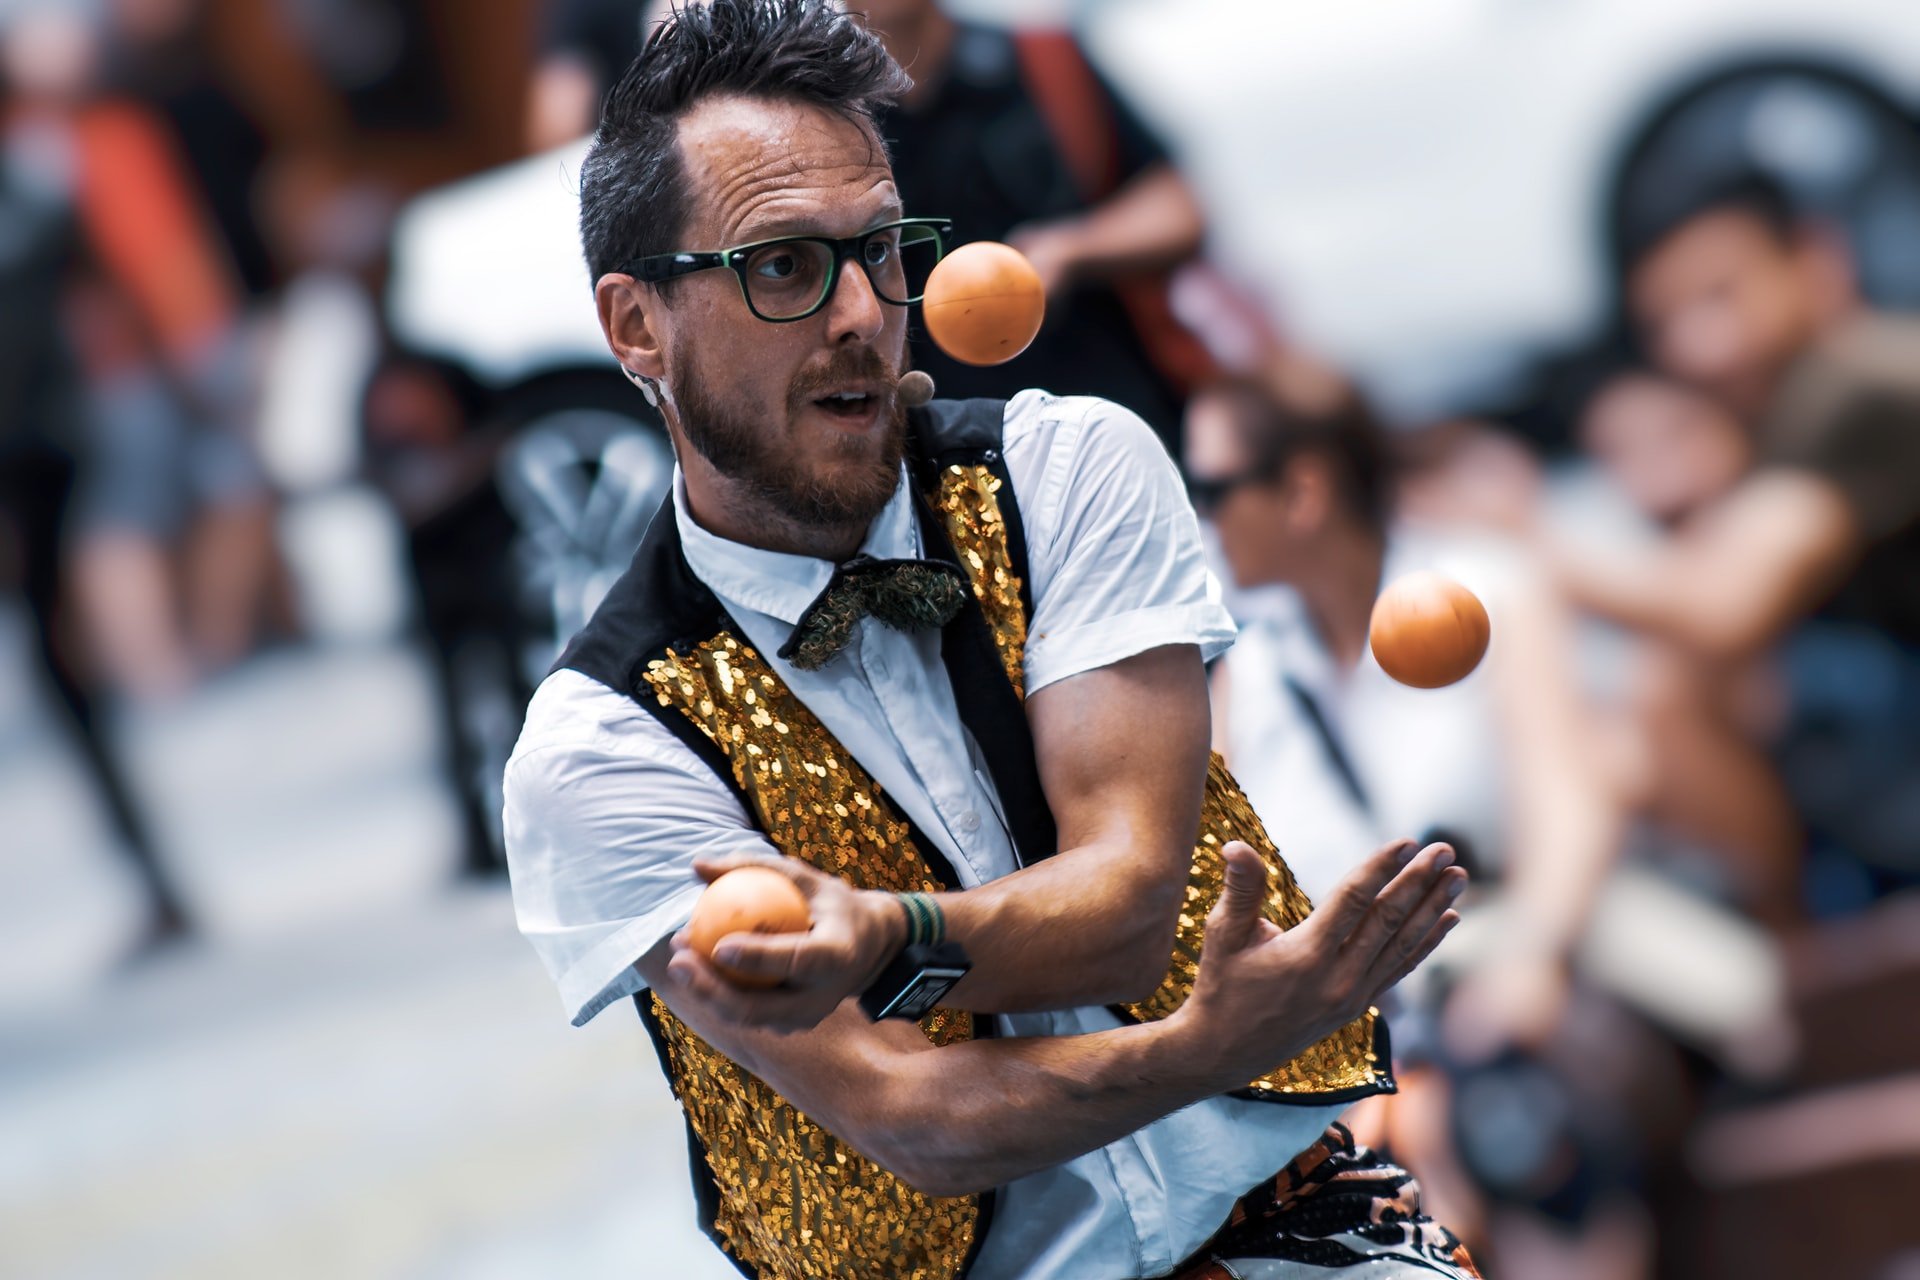 a man juggling to represent managing your career to move it forward